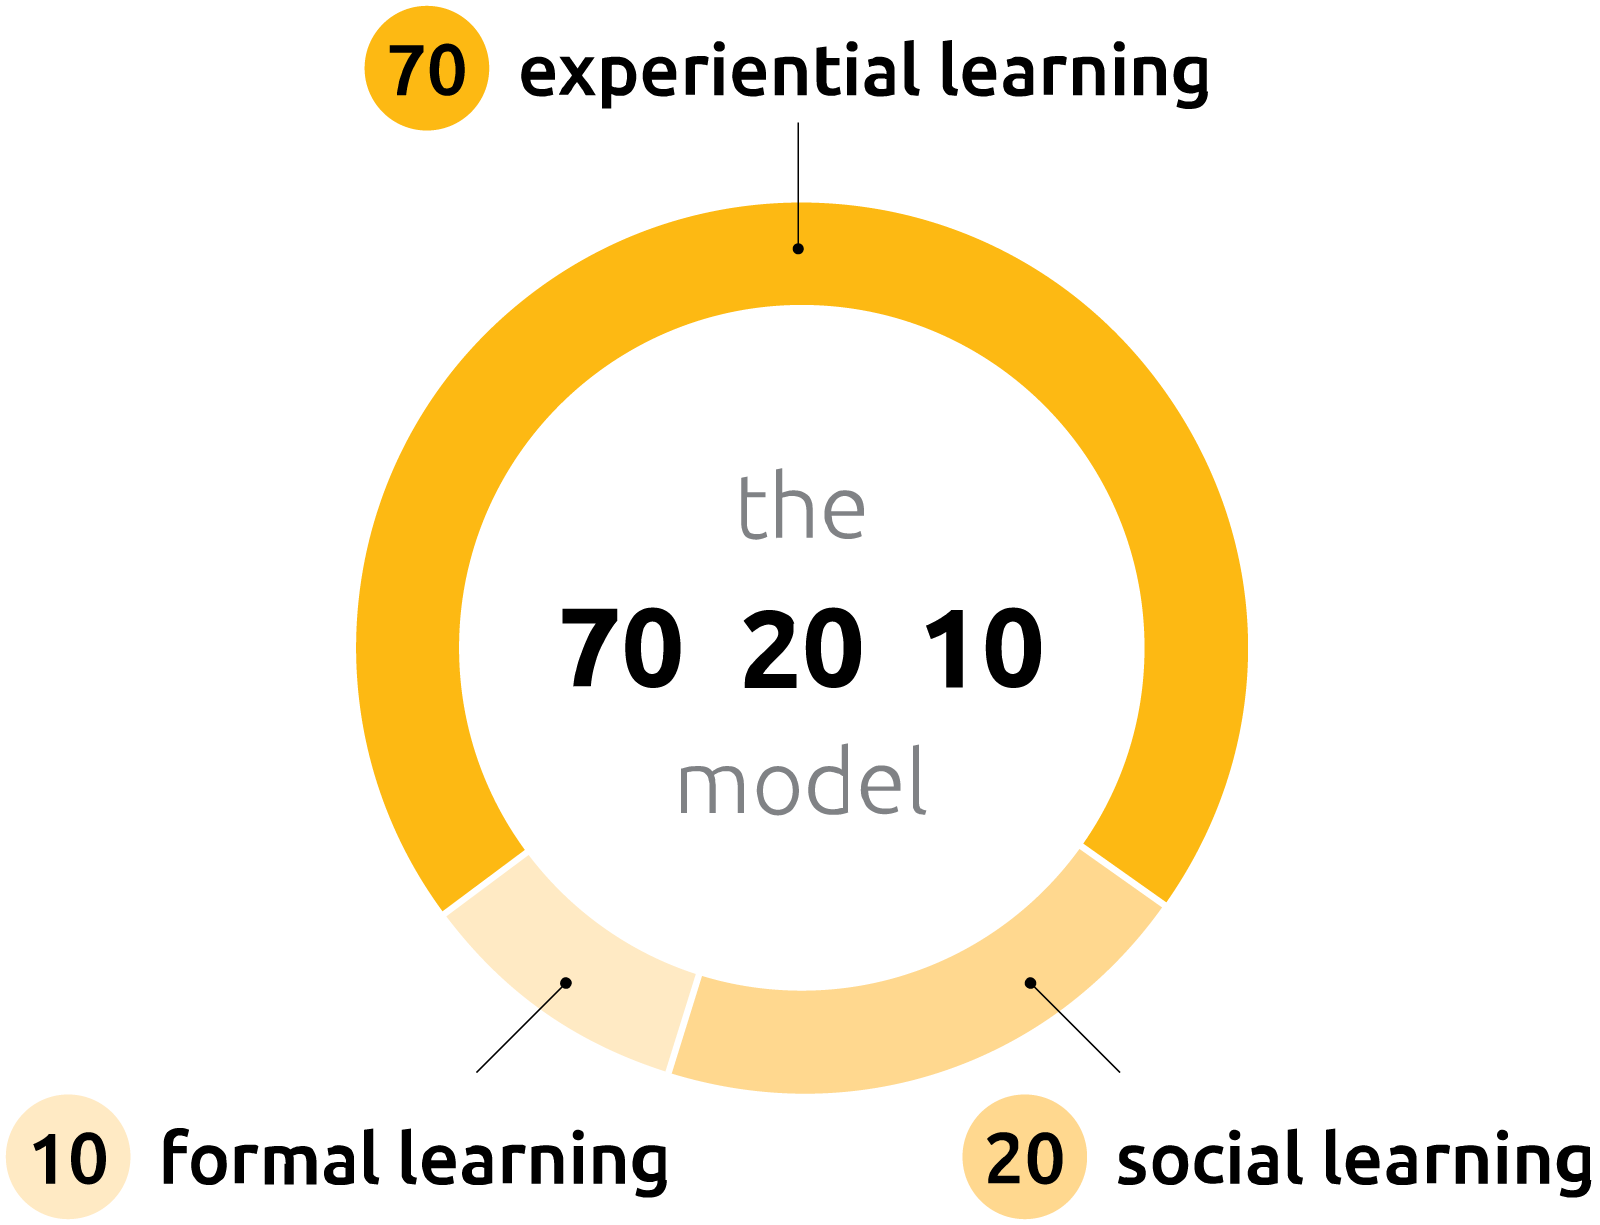 The 70 20 10 model, where 70 percent of learning come from experiential learning, 20 are achieved with social learning, and 10 percent with formal learning​